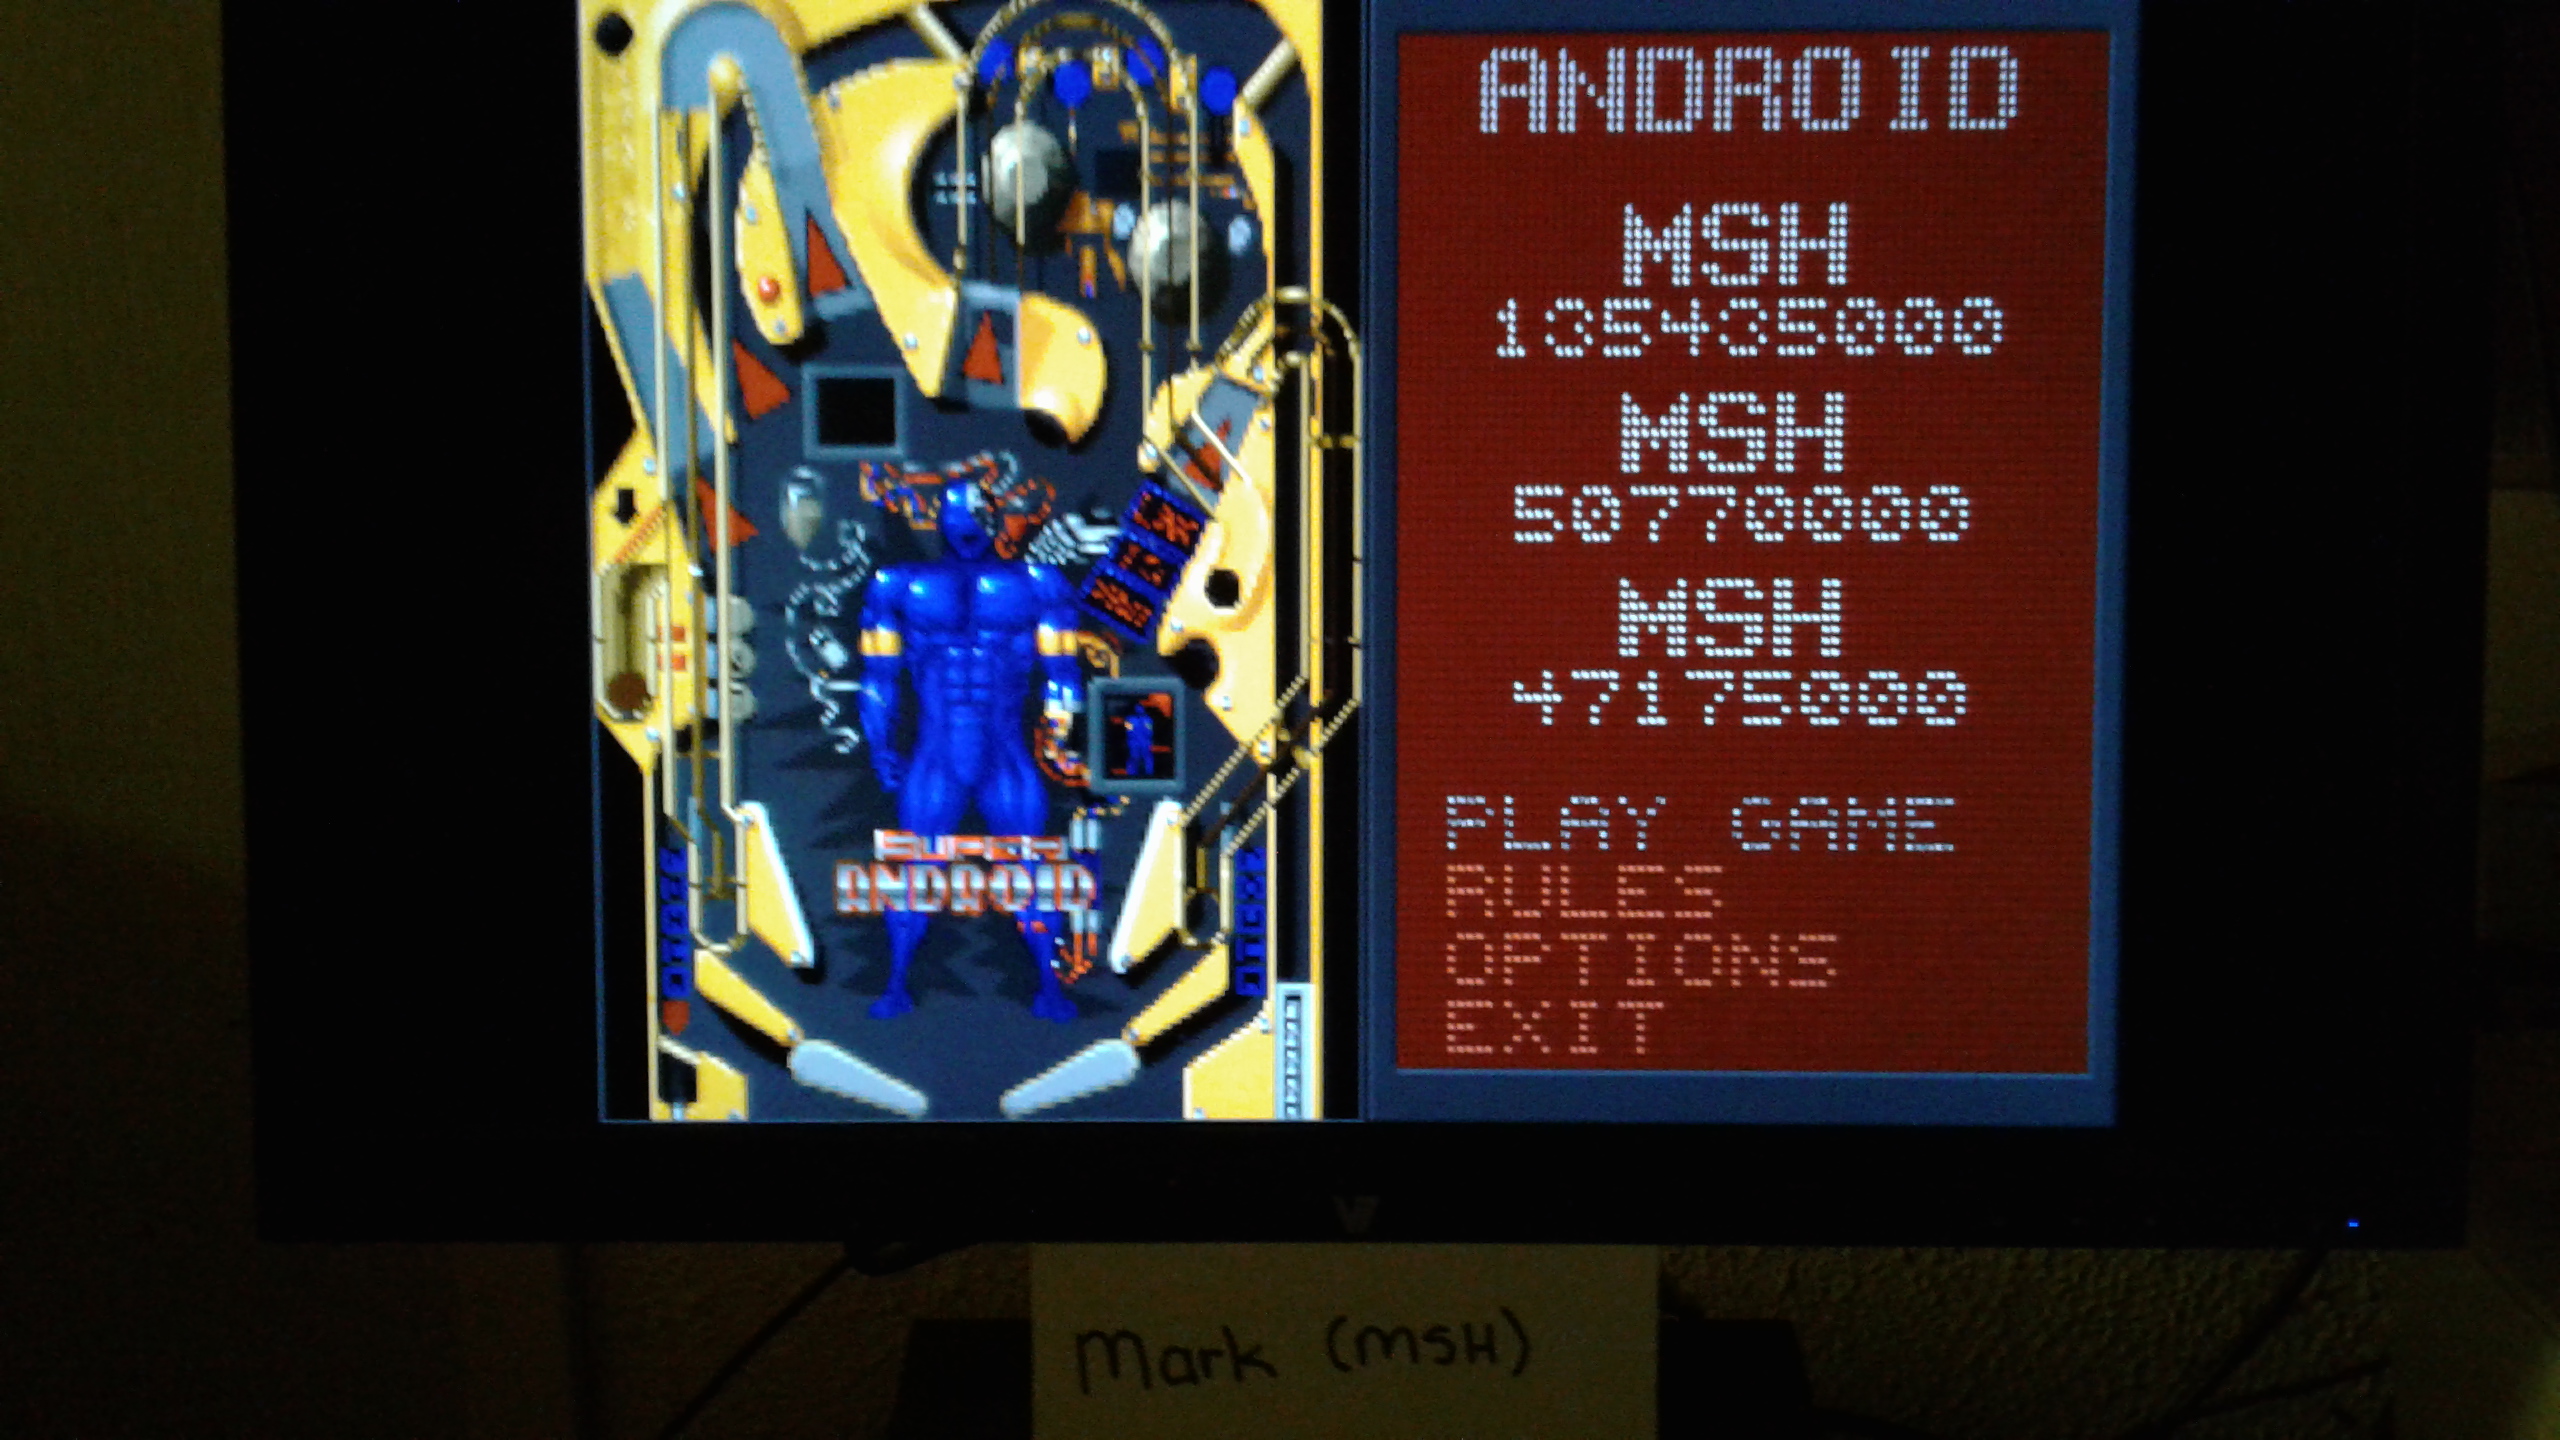 Mark: Epic Pinball: Android (PC Emulated / DOSBox) 135,435,000 points on 2019-05-11 22:47:13